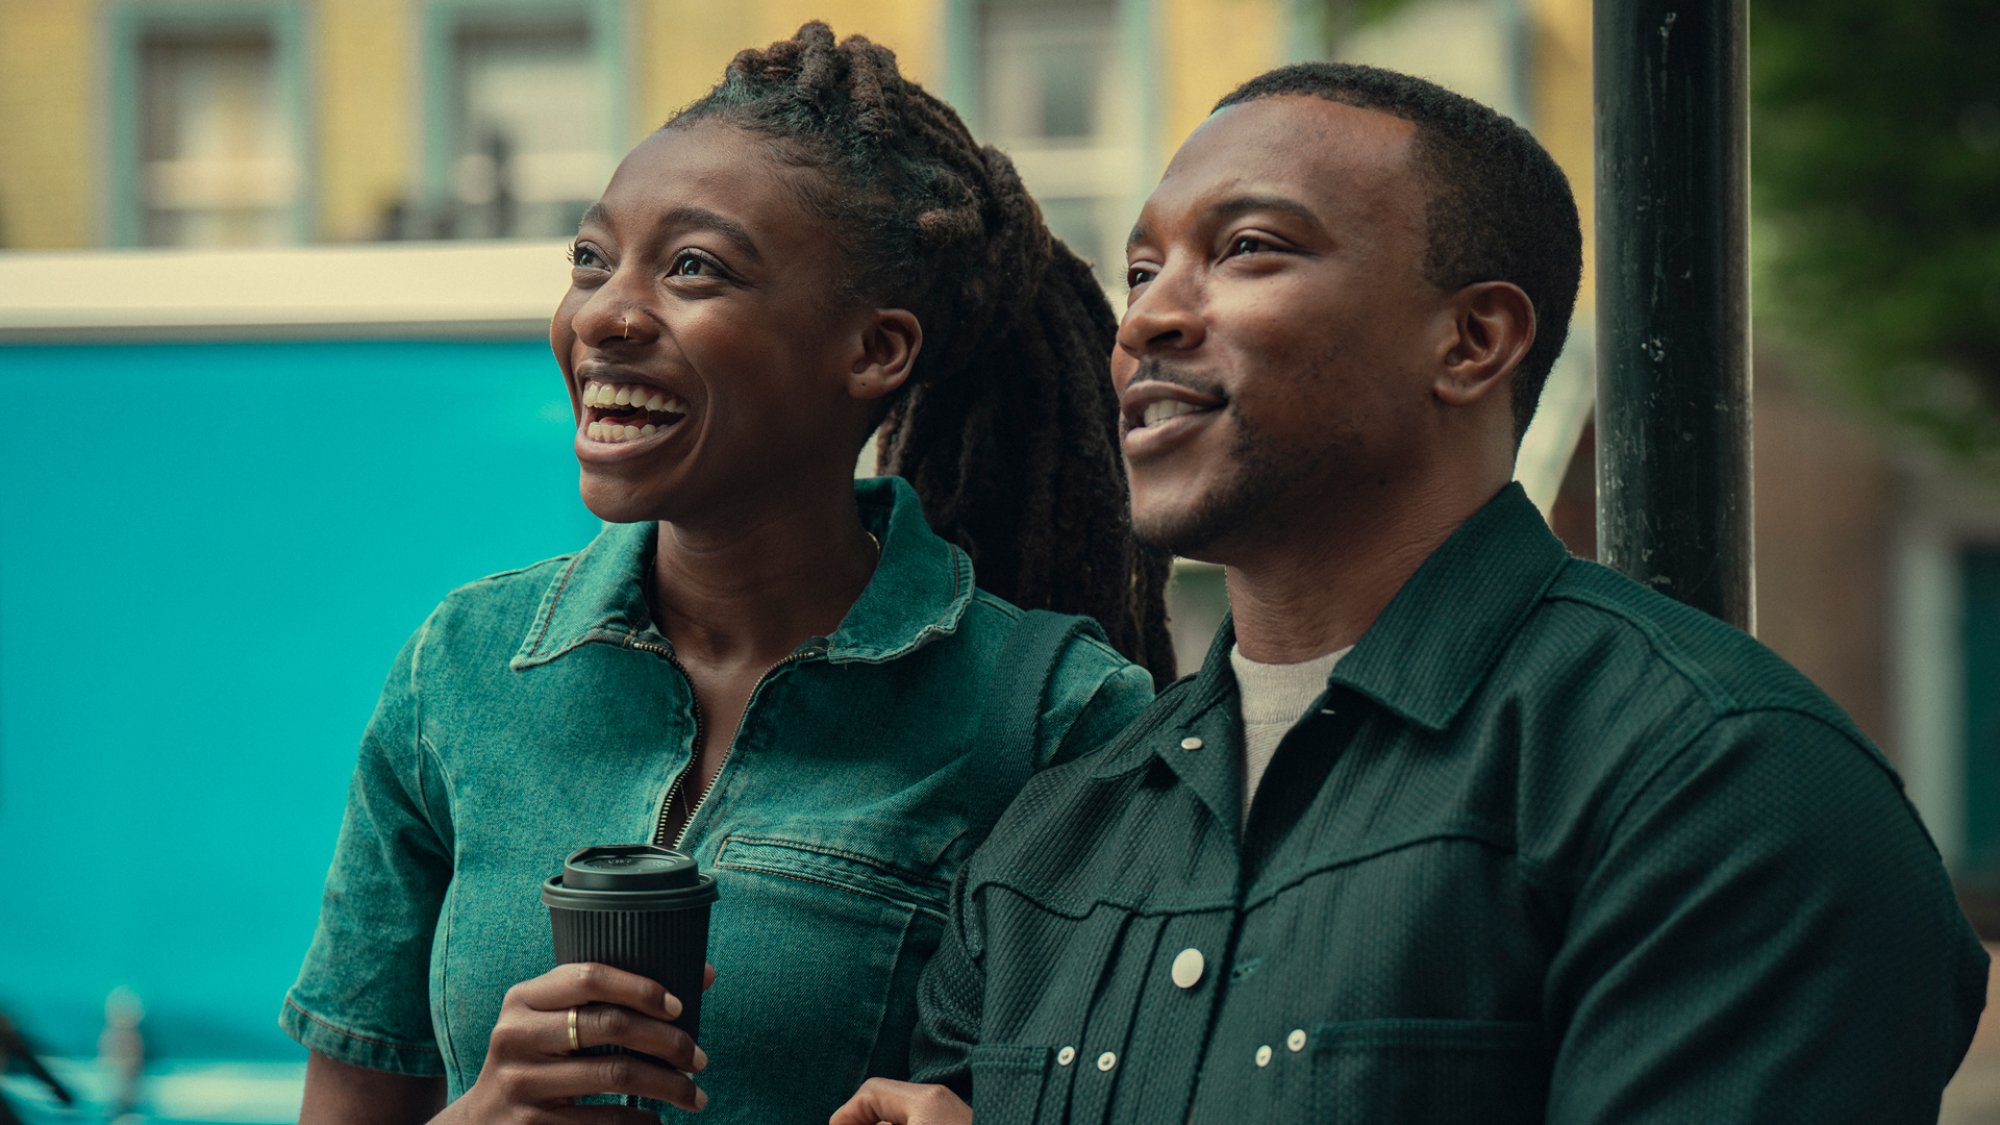 Simbi Ajikawo and Ashley Walters stand arm in arm smiling and holding coffee in the TV show "Top Boy"